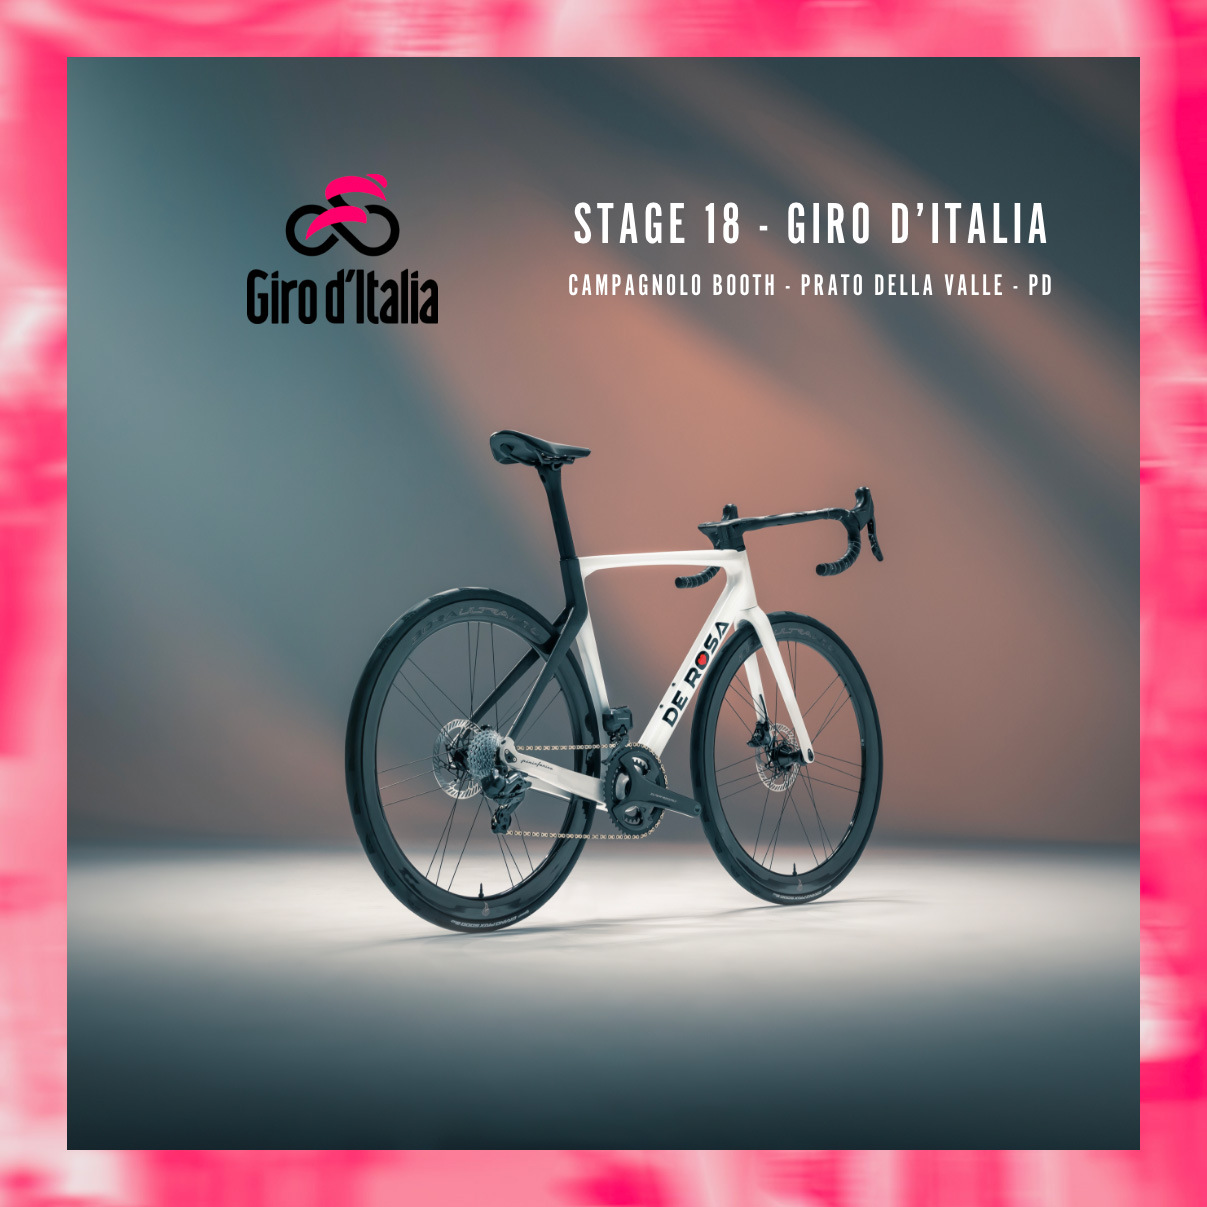 CAMPAGNOLO IN PADUA FOR THE 18TH STAGE OF THE GIRO D'ITALIA